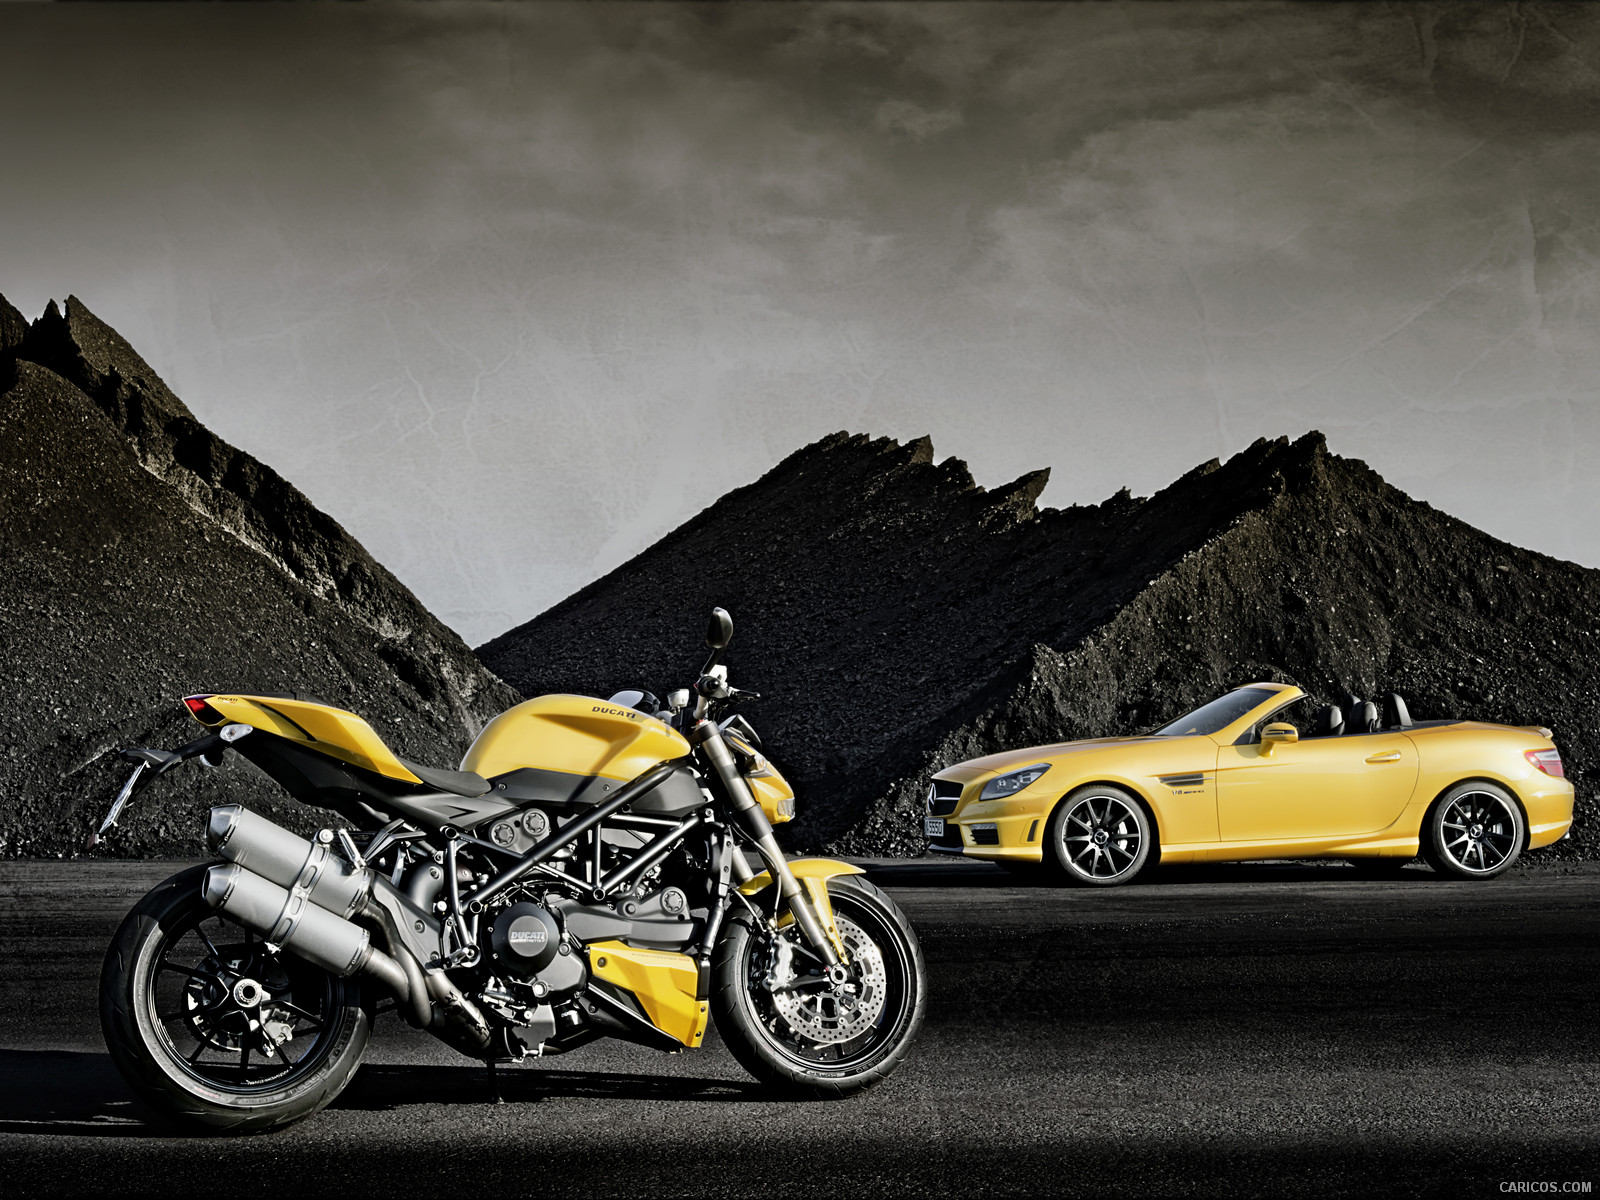 Mercedes-Benz SLK 55 AMG and Ducati Streetfighter 848 - , #40 of 47